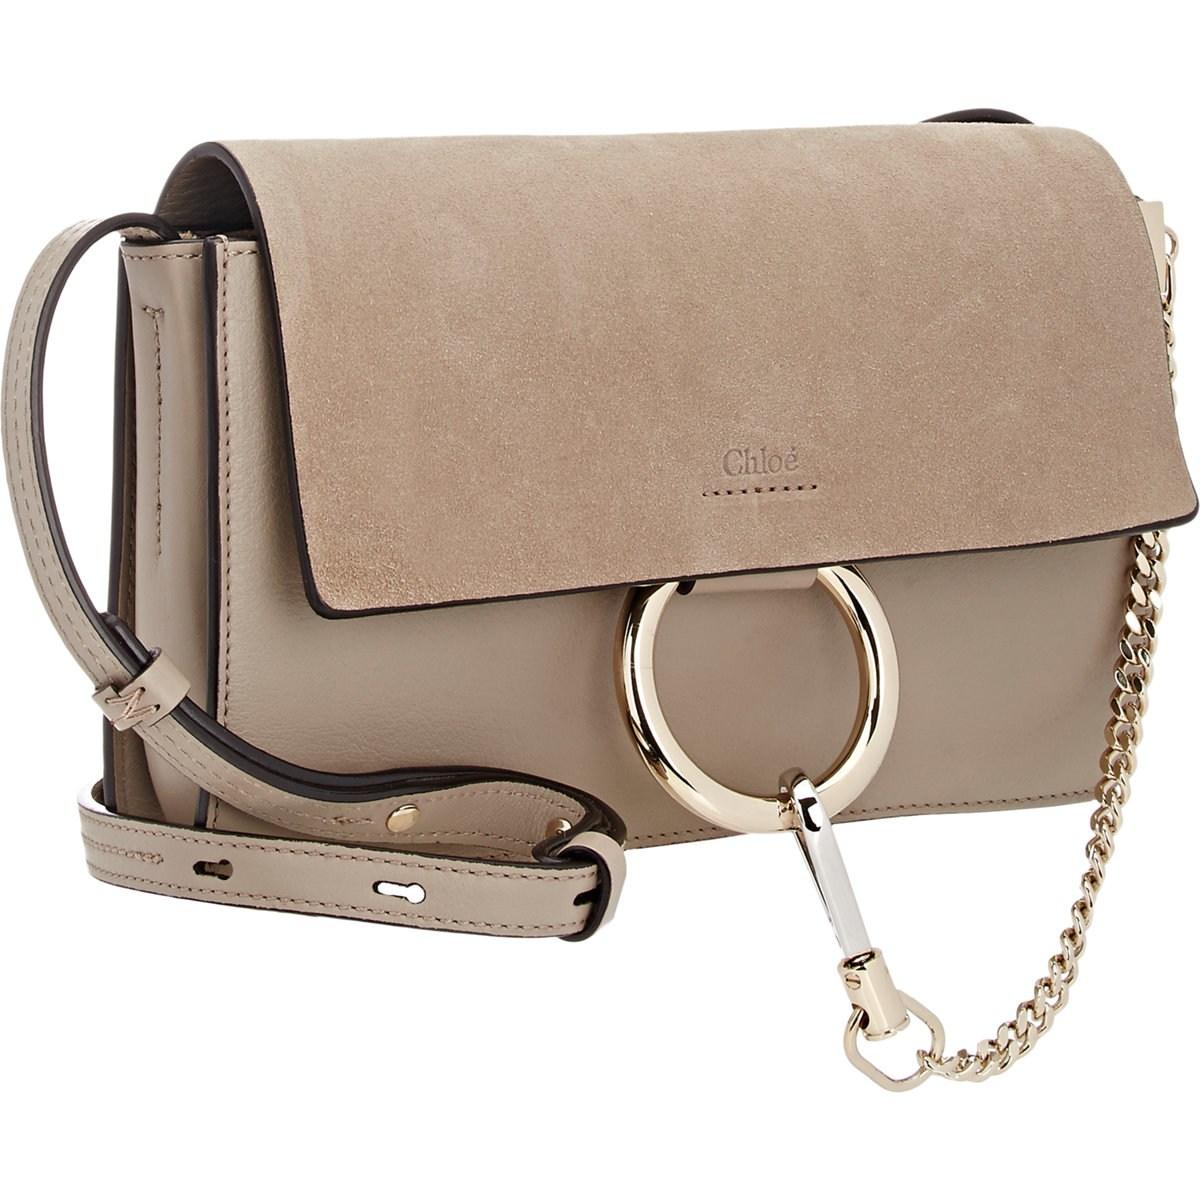 Chloé Faye Small Leather Shoulder Bag in Grey (Gray) - Lyst